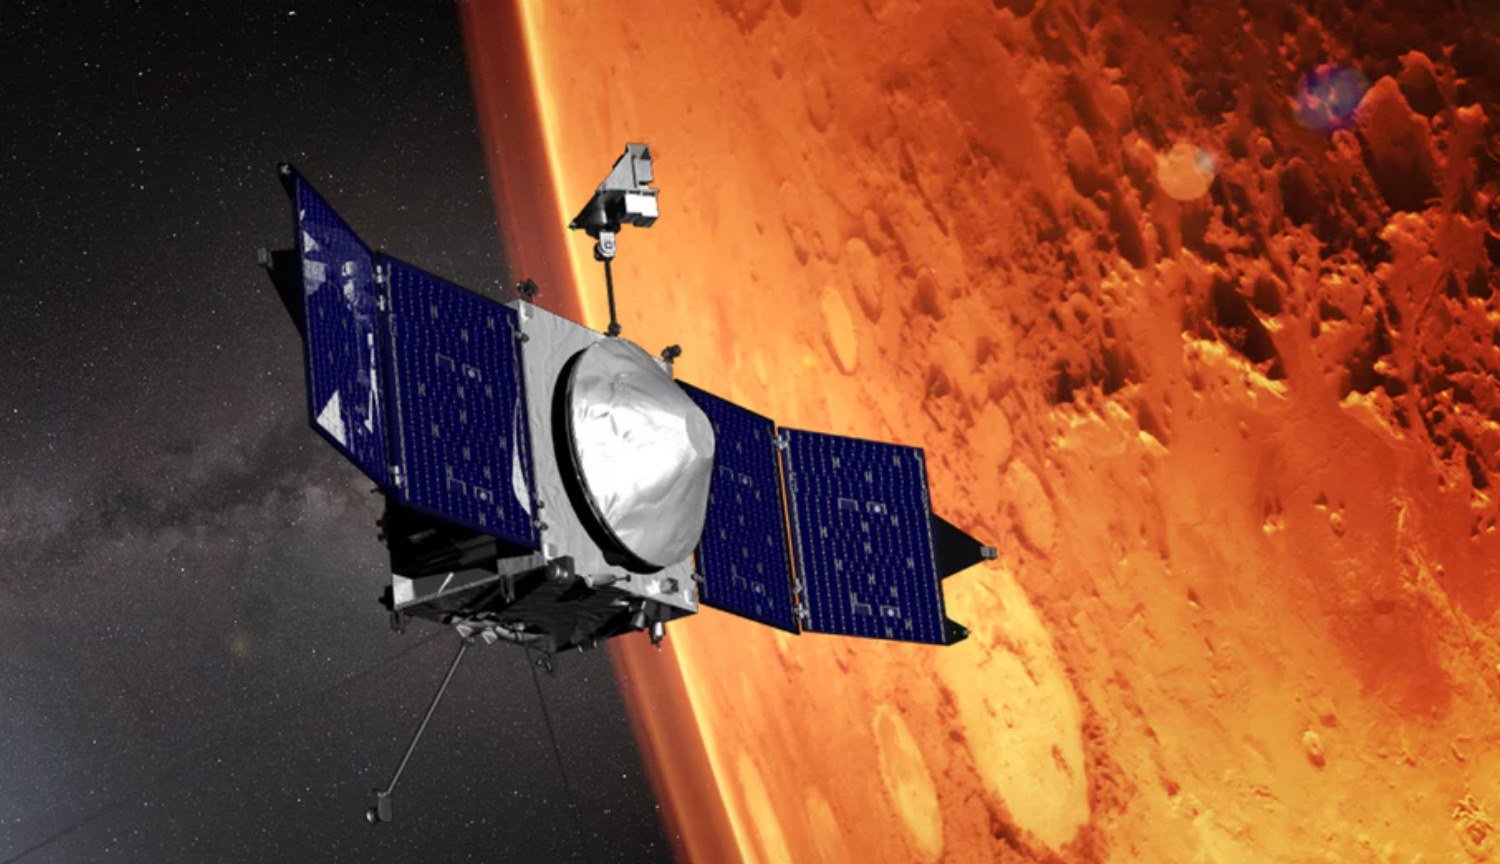 What will the Mars satellite MAVEN in 2020?